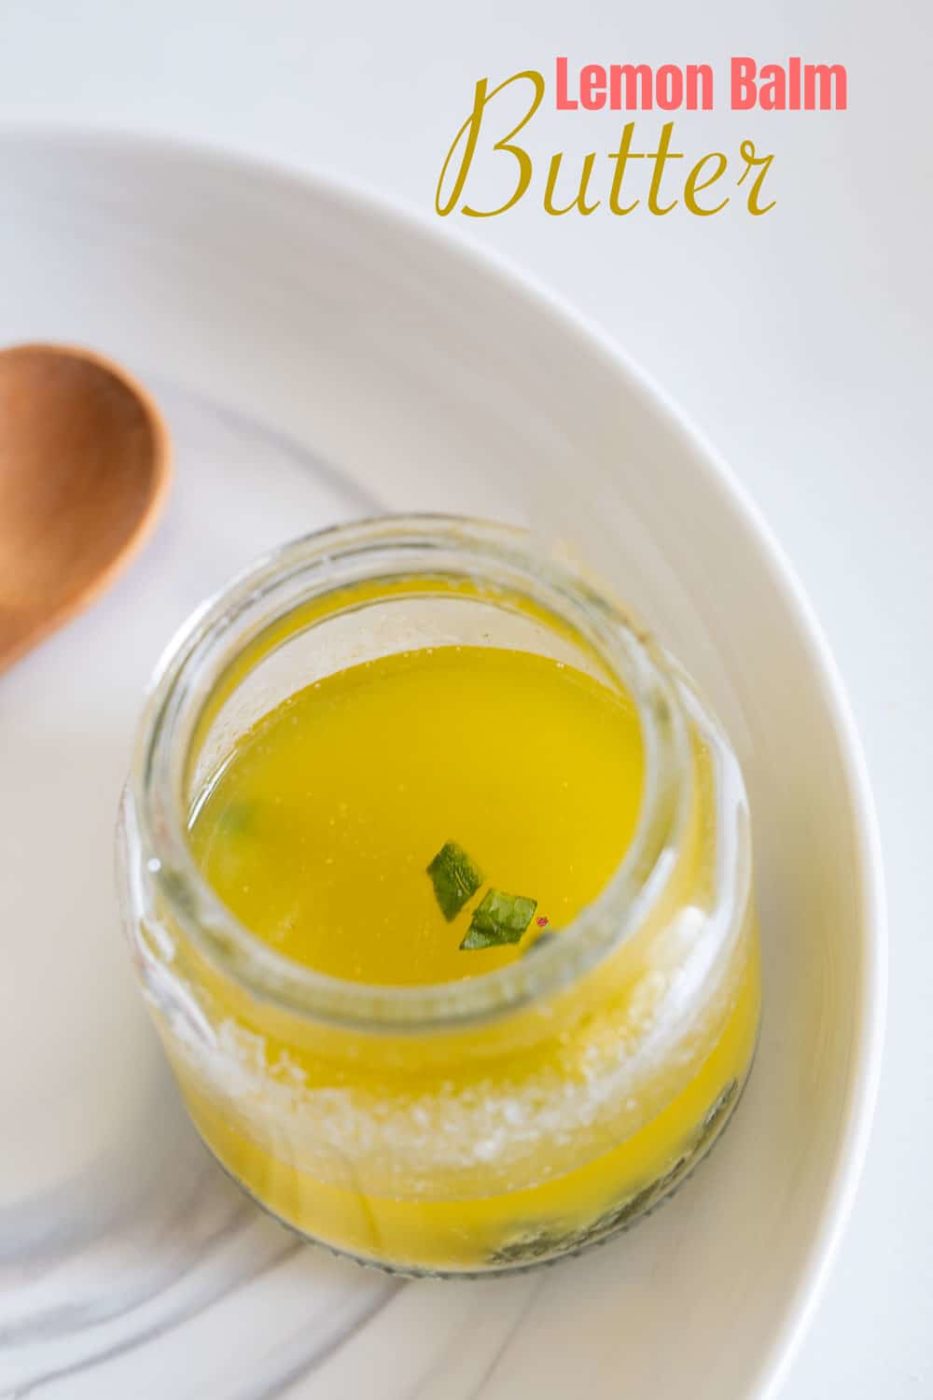 Top view of a glass bottle filled with melted lemon balm butter and few chopped lemon balm pieces floating on top. A wooden spoon next to the bottle.